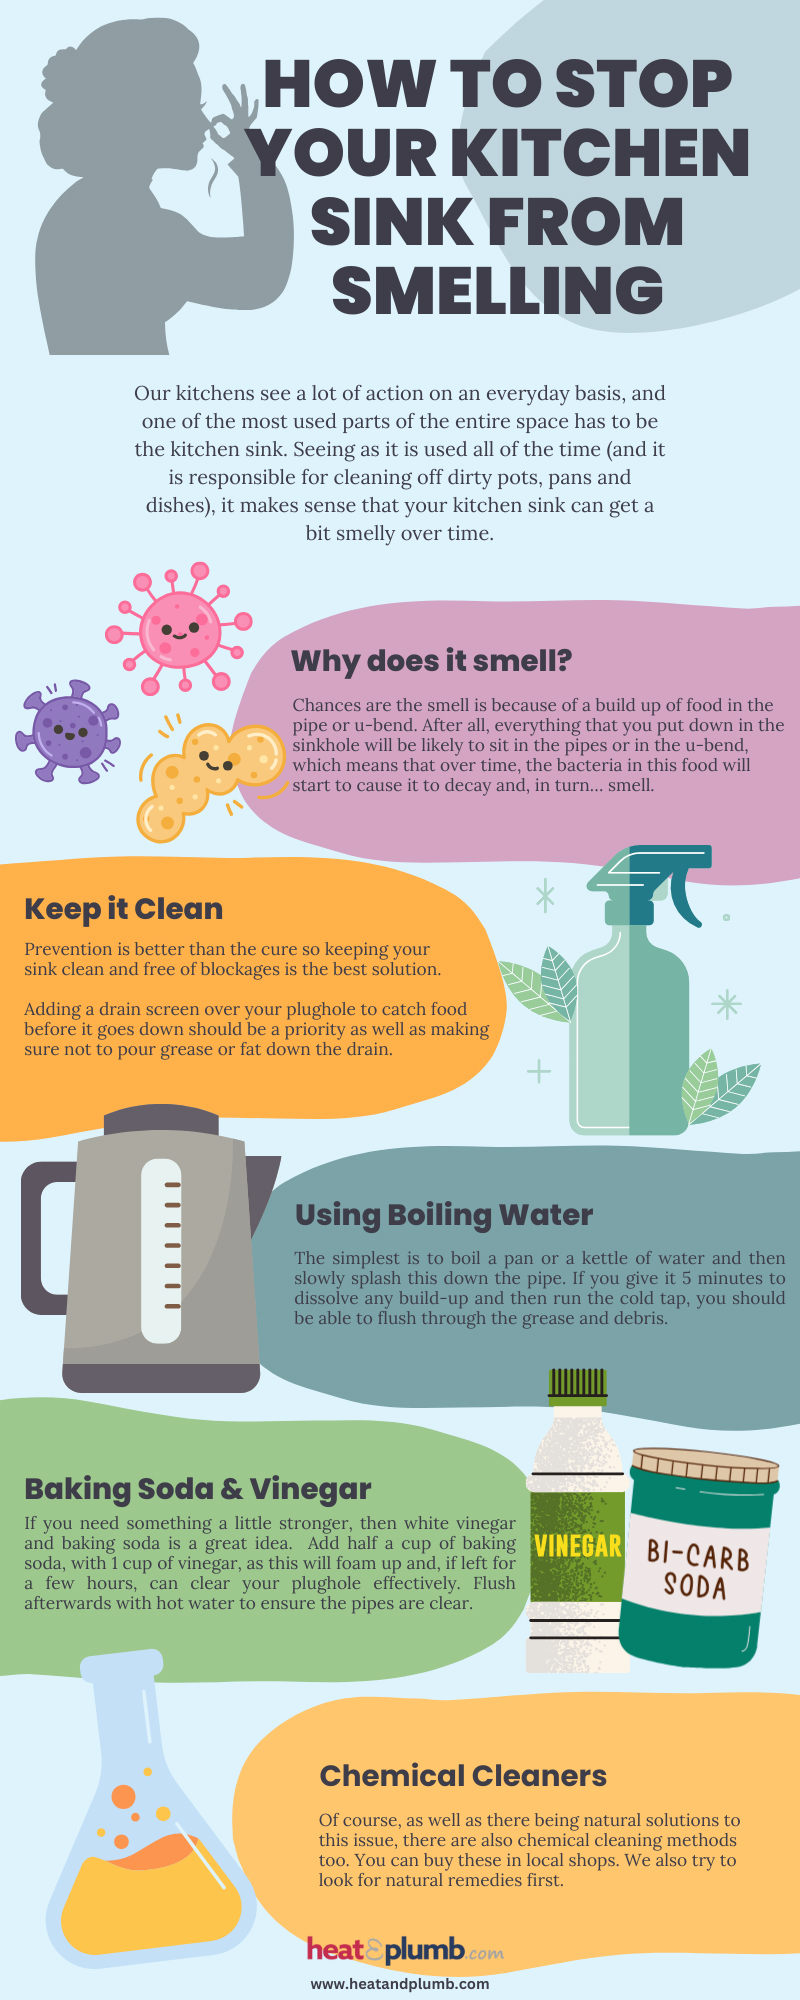 How to stop your kitchen sink from smelling - Infographic